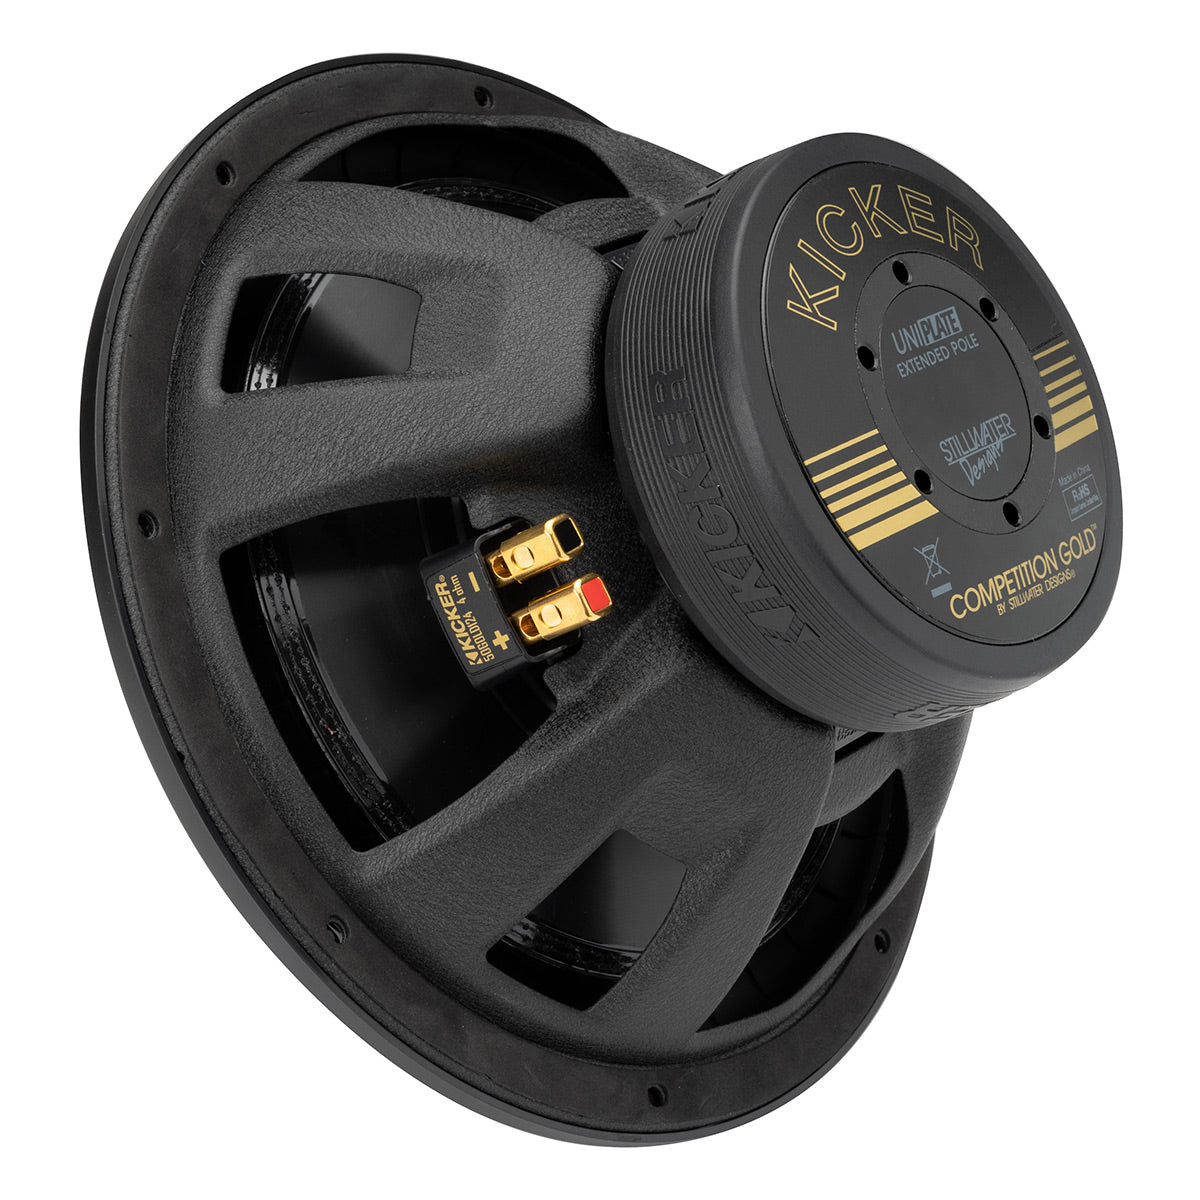 Kicker 12" Competition Gold 4 Ohm Subwoofer 50th Anniversary Edition - Each